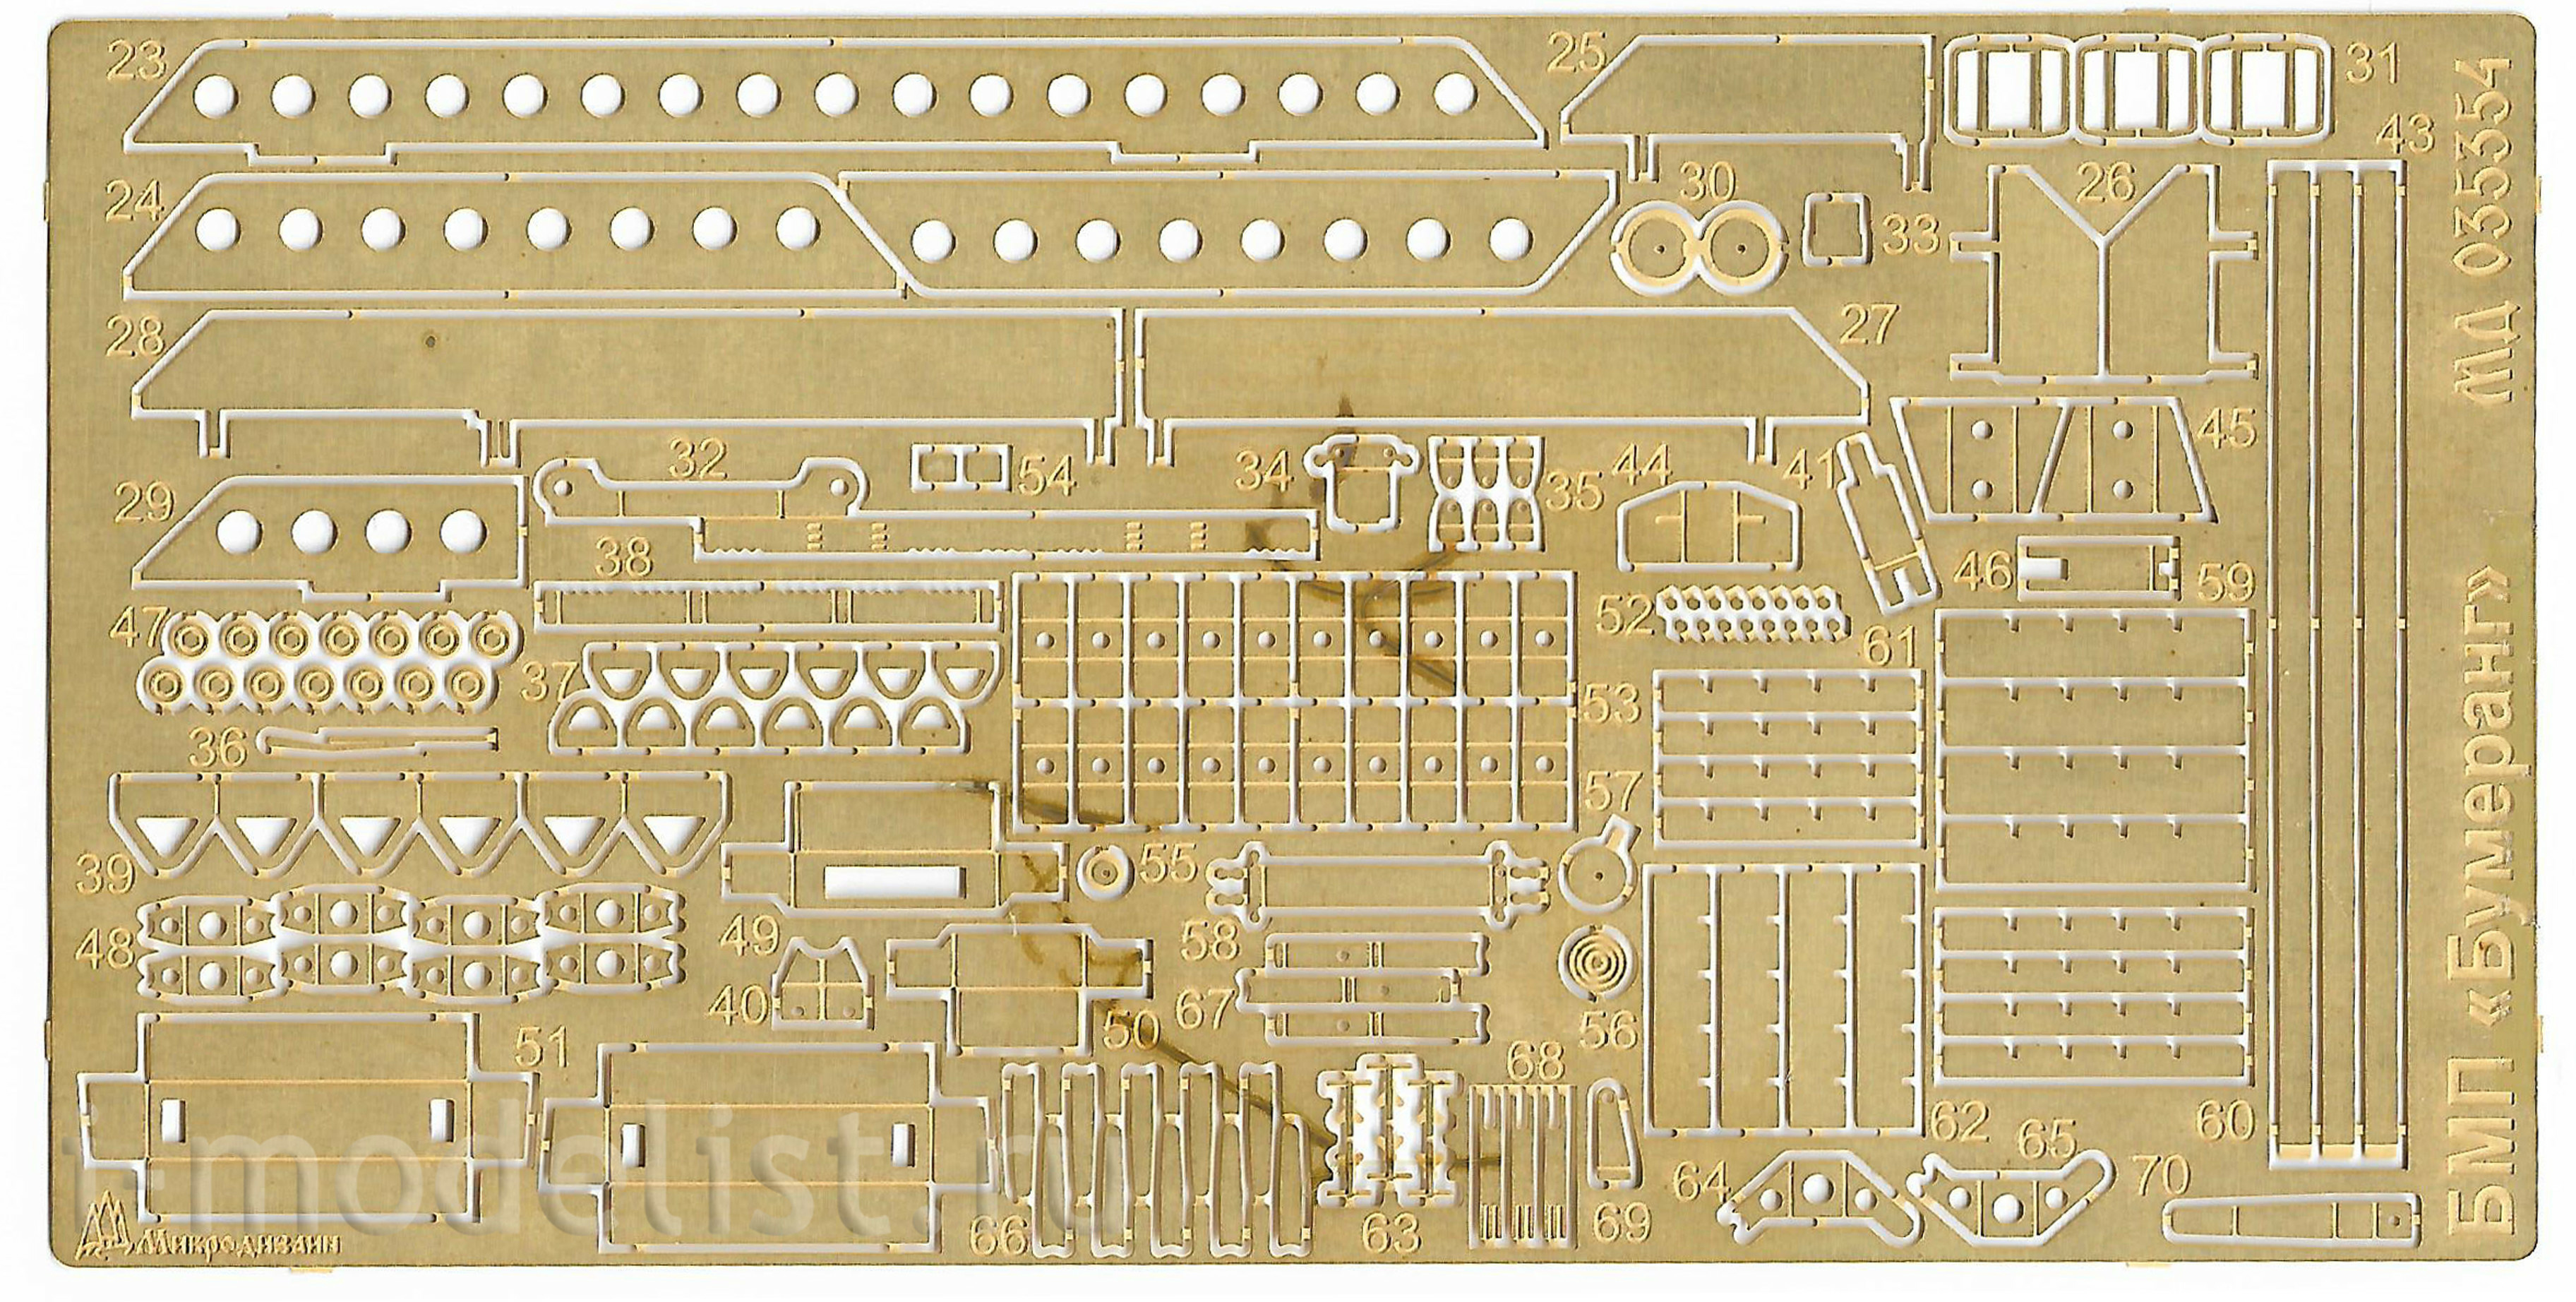 035354 Microdesign 1/35 photo Etching for BMP 